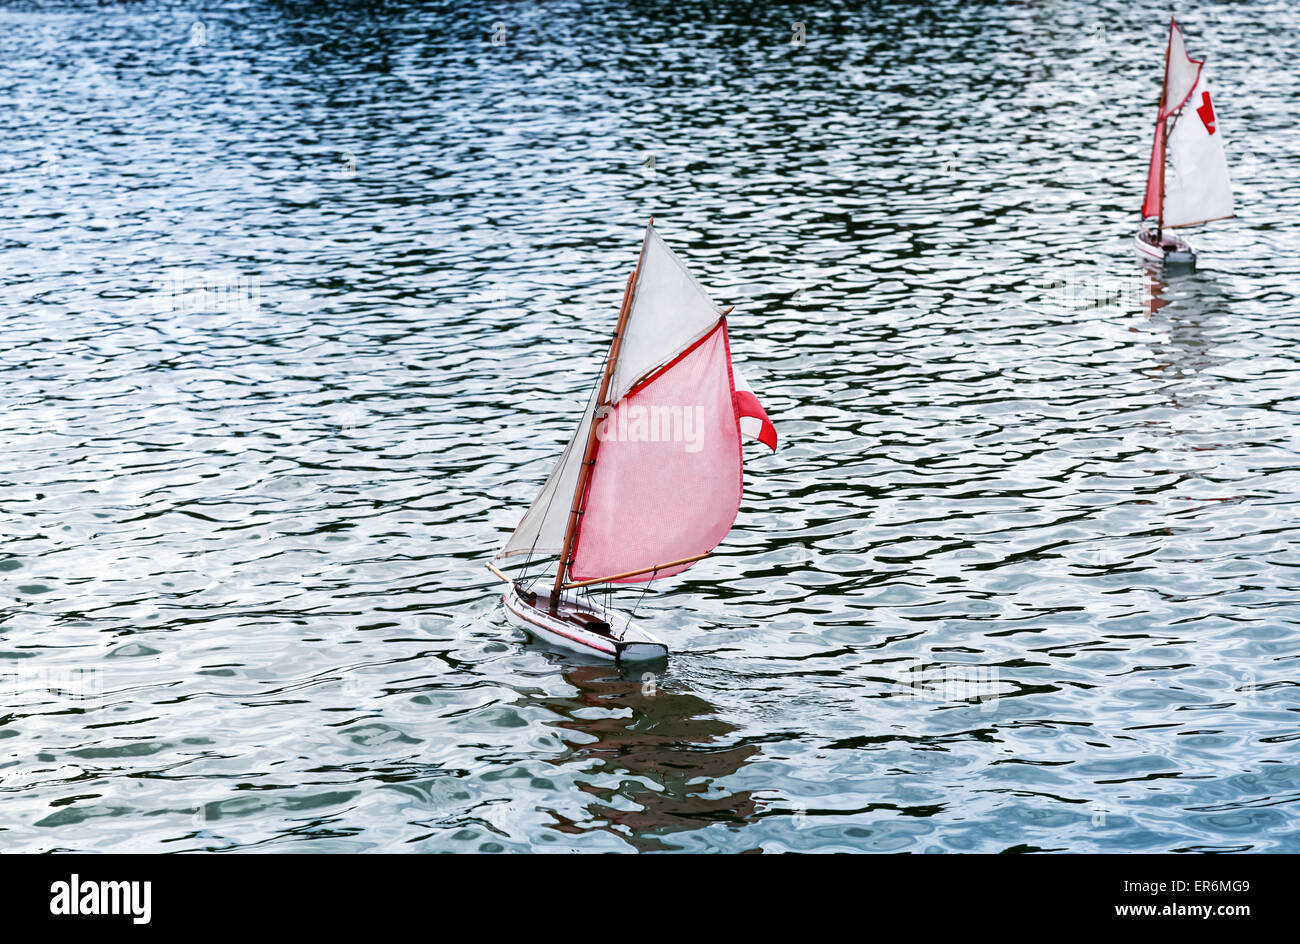 Traditional small wooden sailing toy boats in the pond of park Jardin du Luxembourg, Paris, France Stock Photo